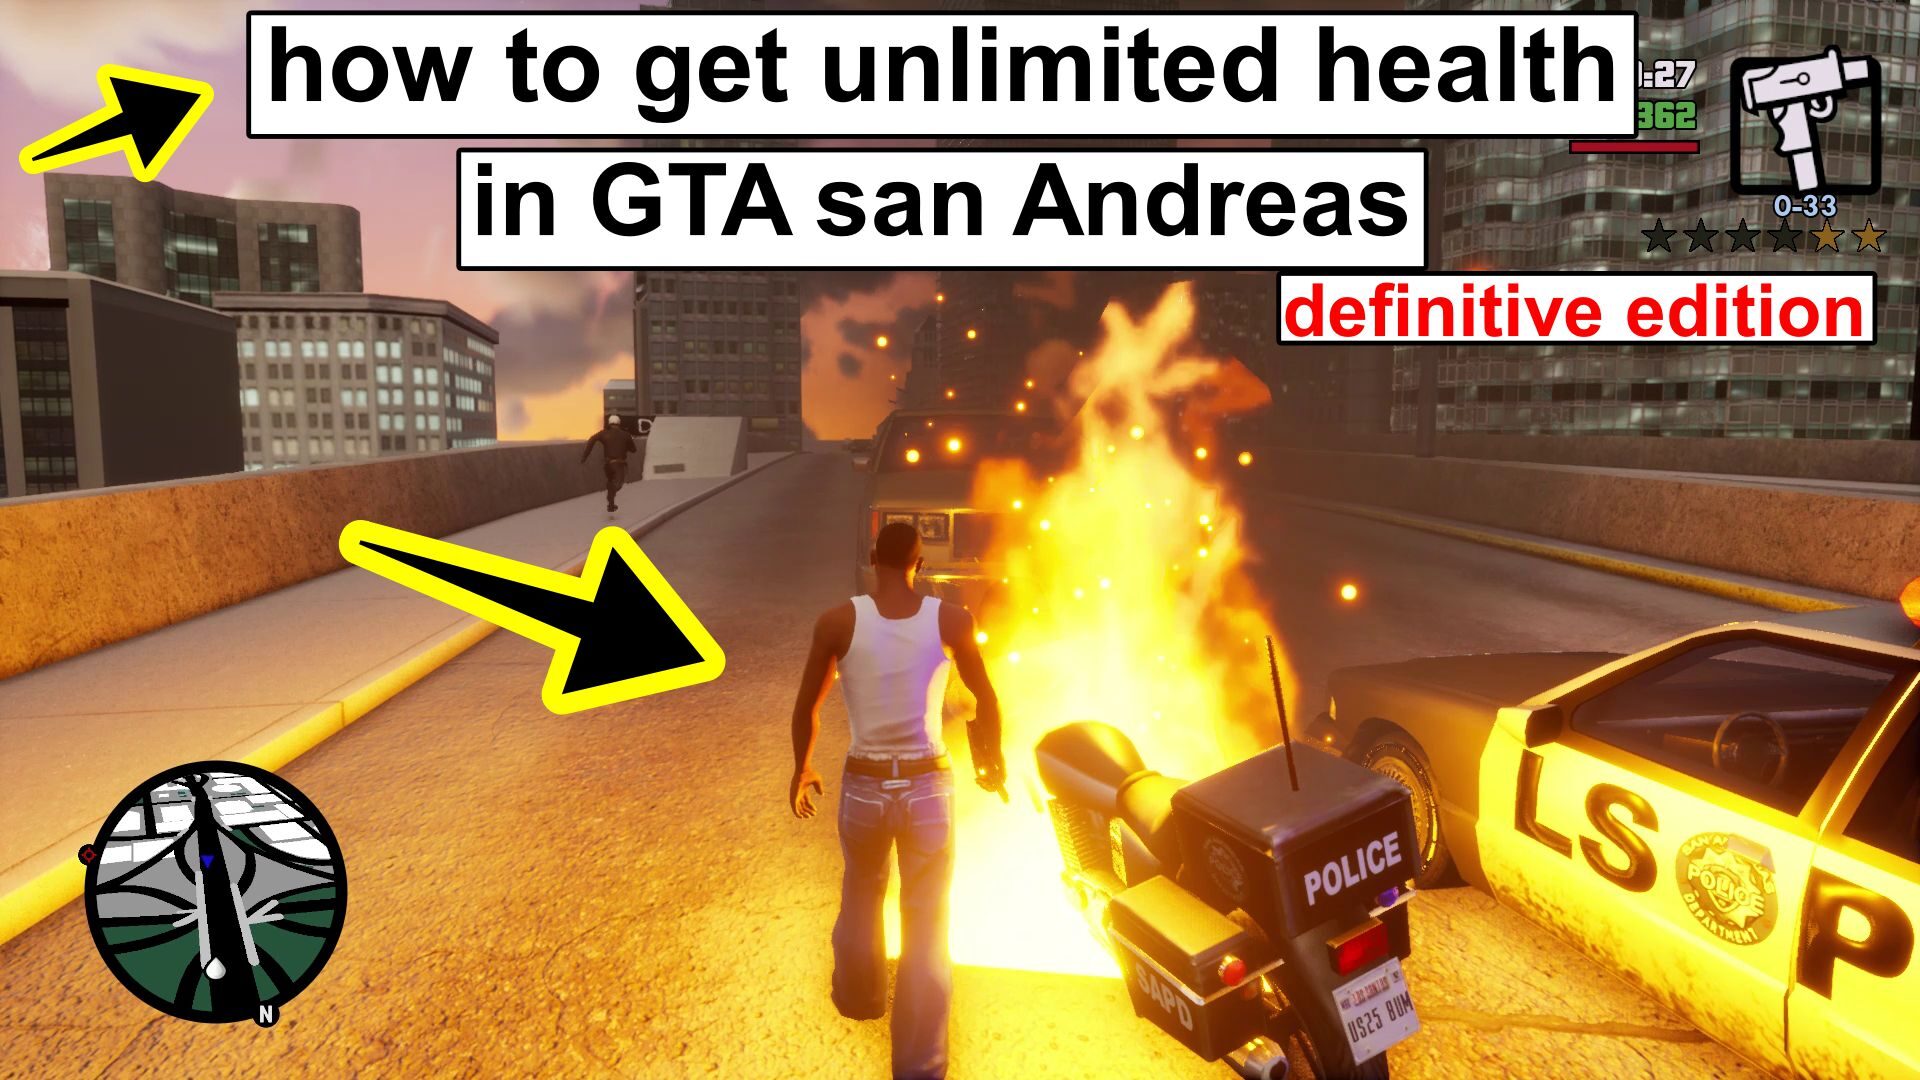 how to get unlimited health in GTA san Andreas definitive edition